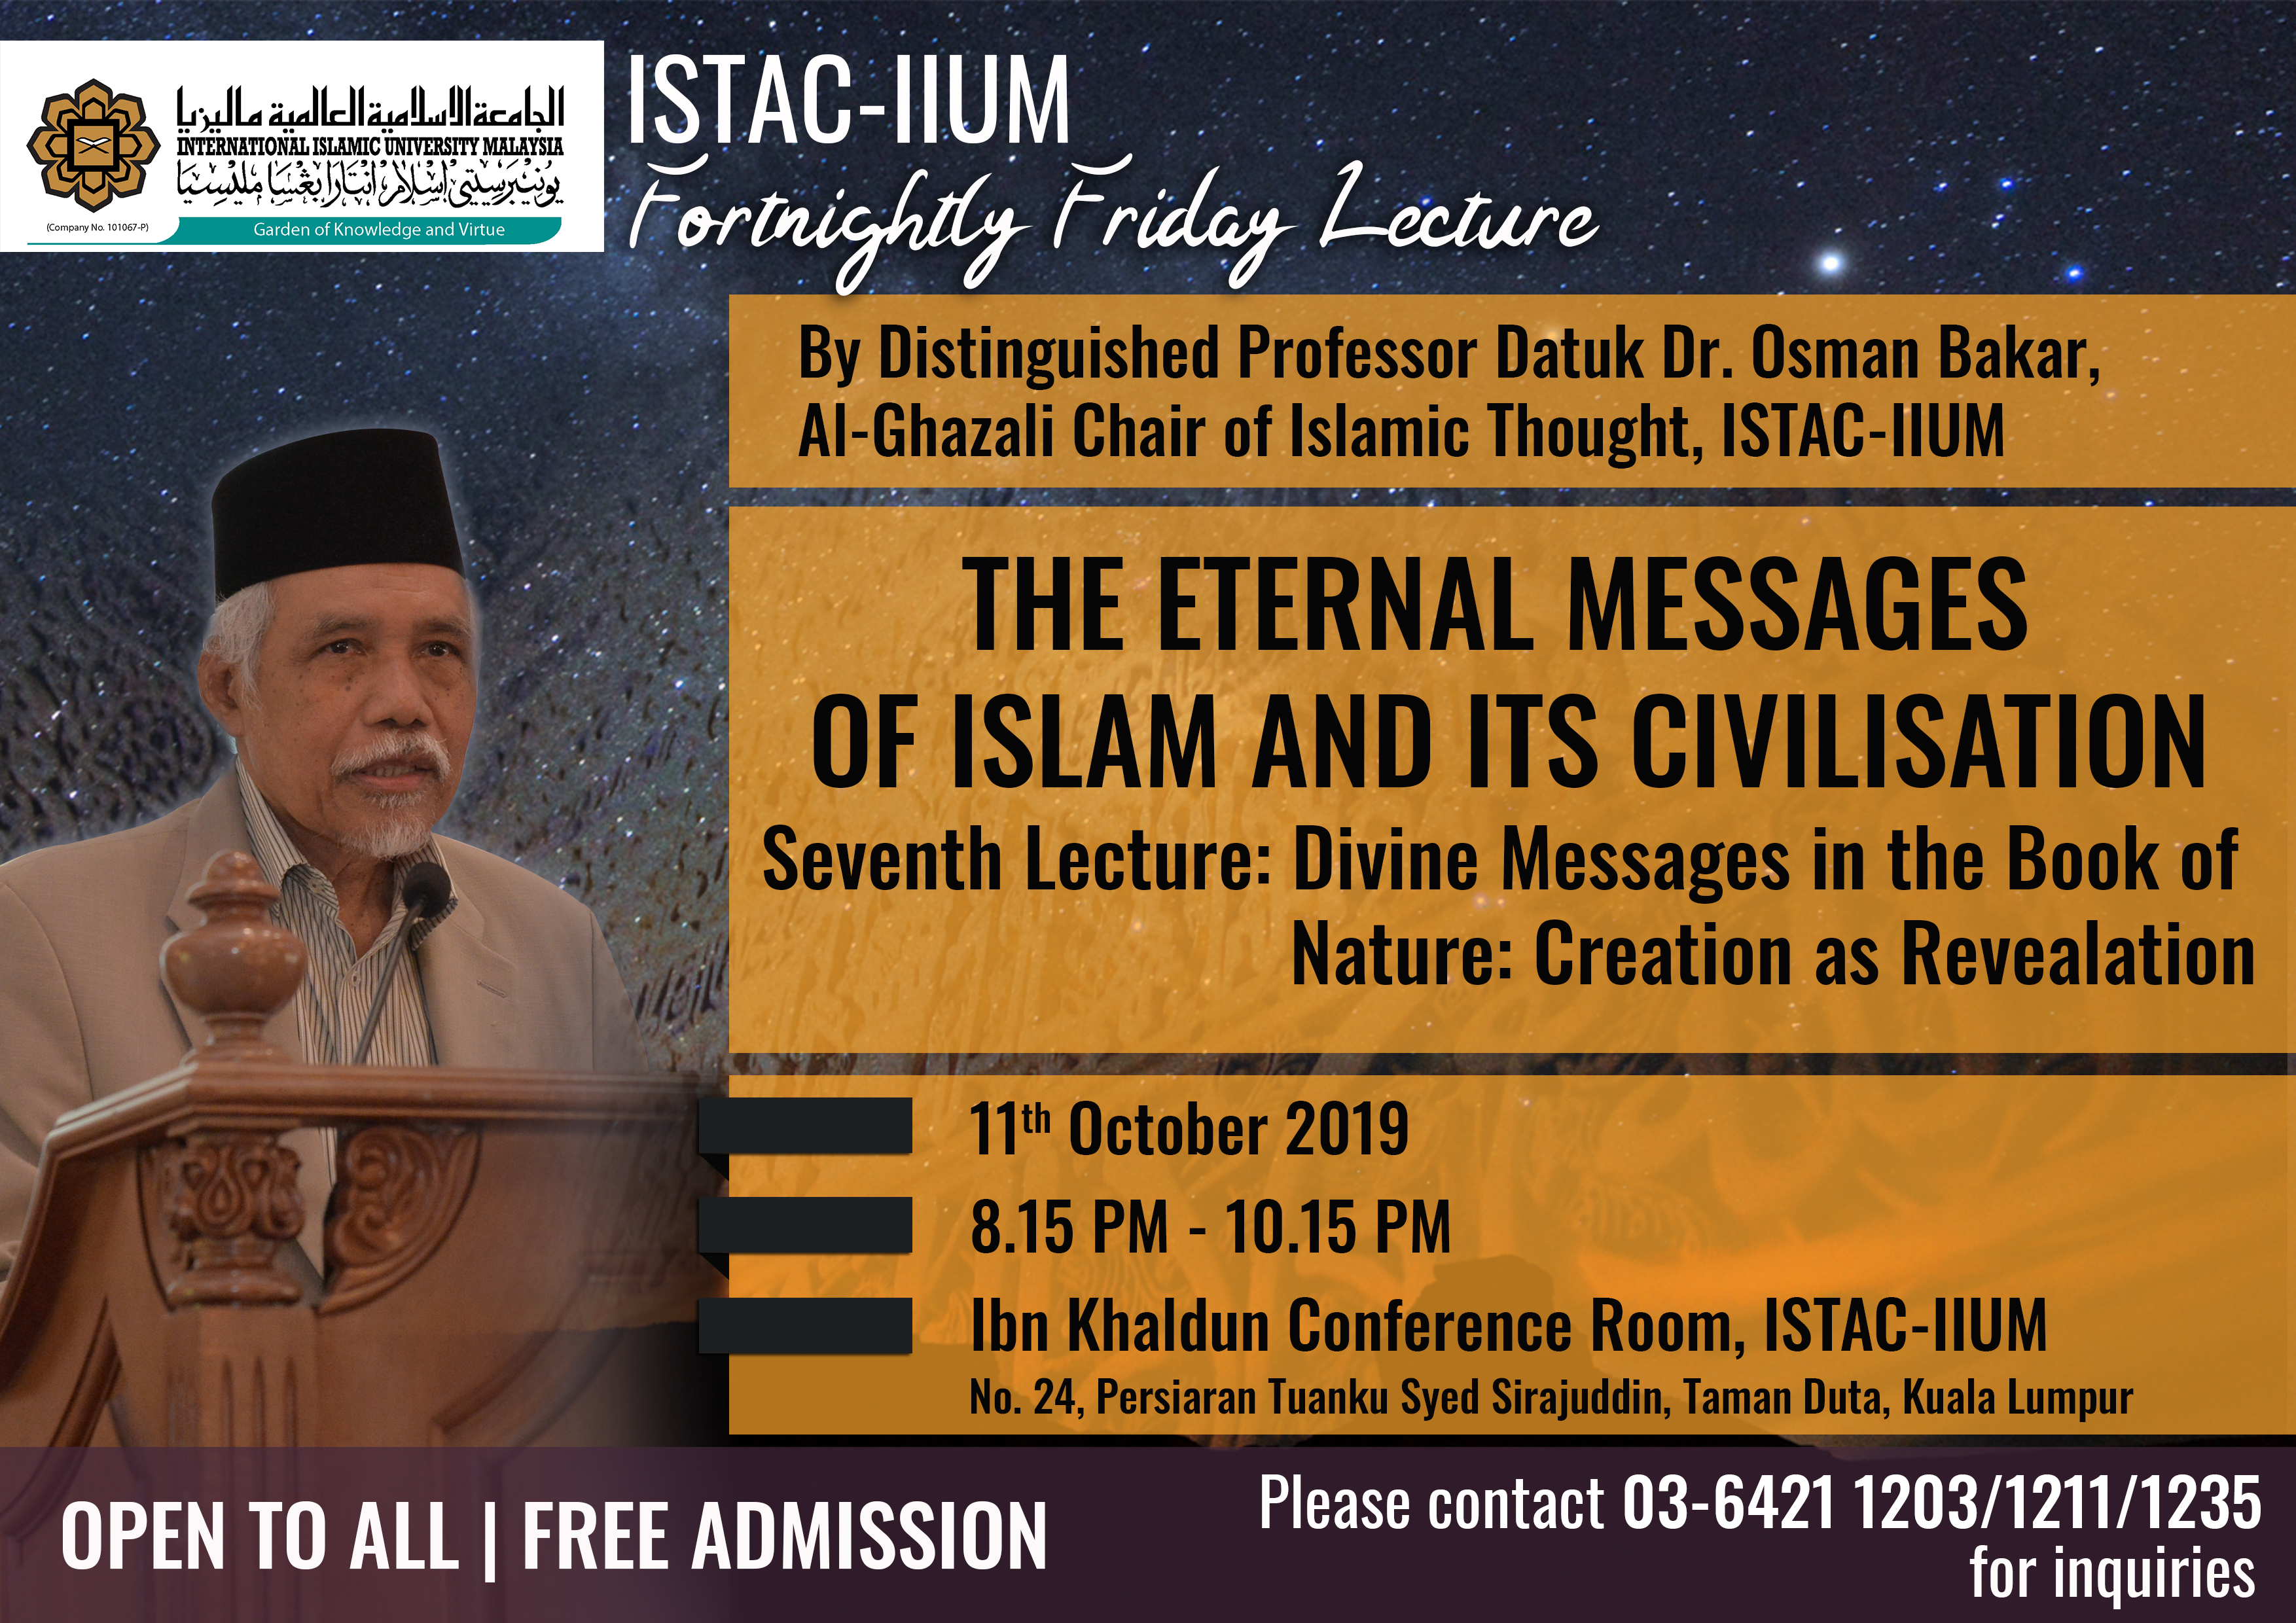 ISTAC-IIUM FORTNIGHTLY FRIDAY LECTURE